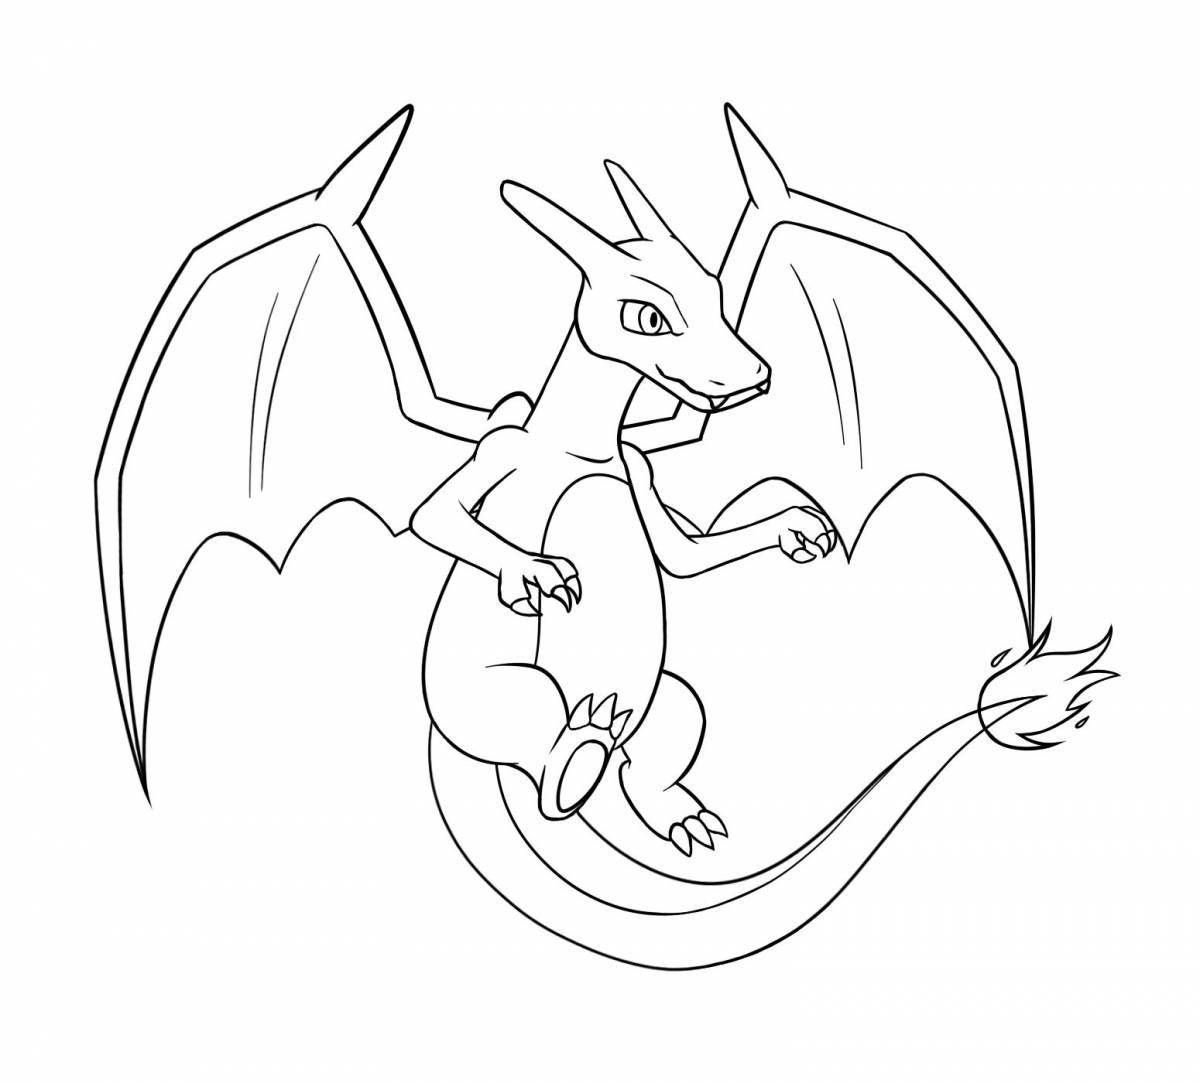 Charizard pokemon blooming coloring page